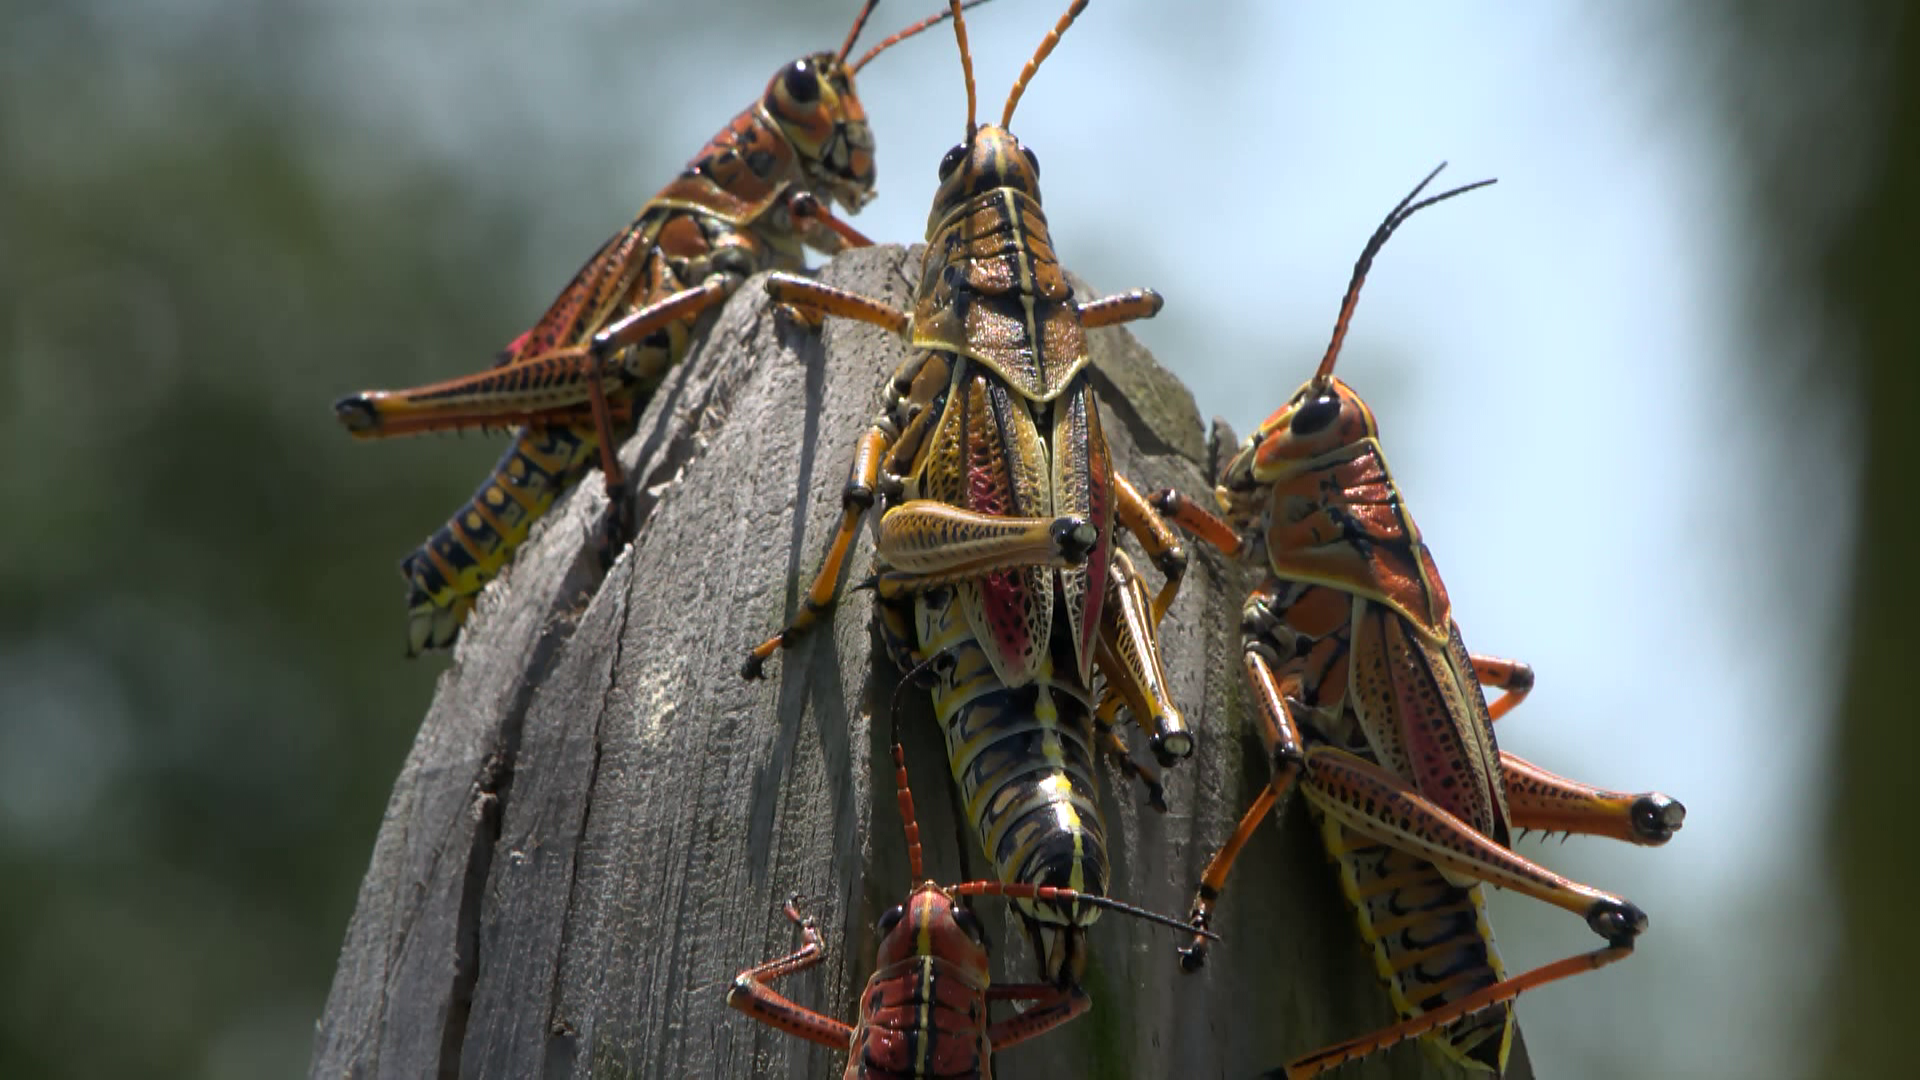 Florida Faces Invasion of Oversized Grasshoppers